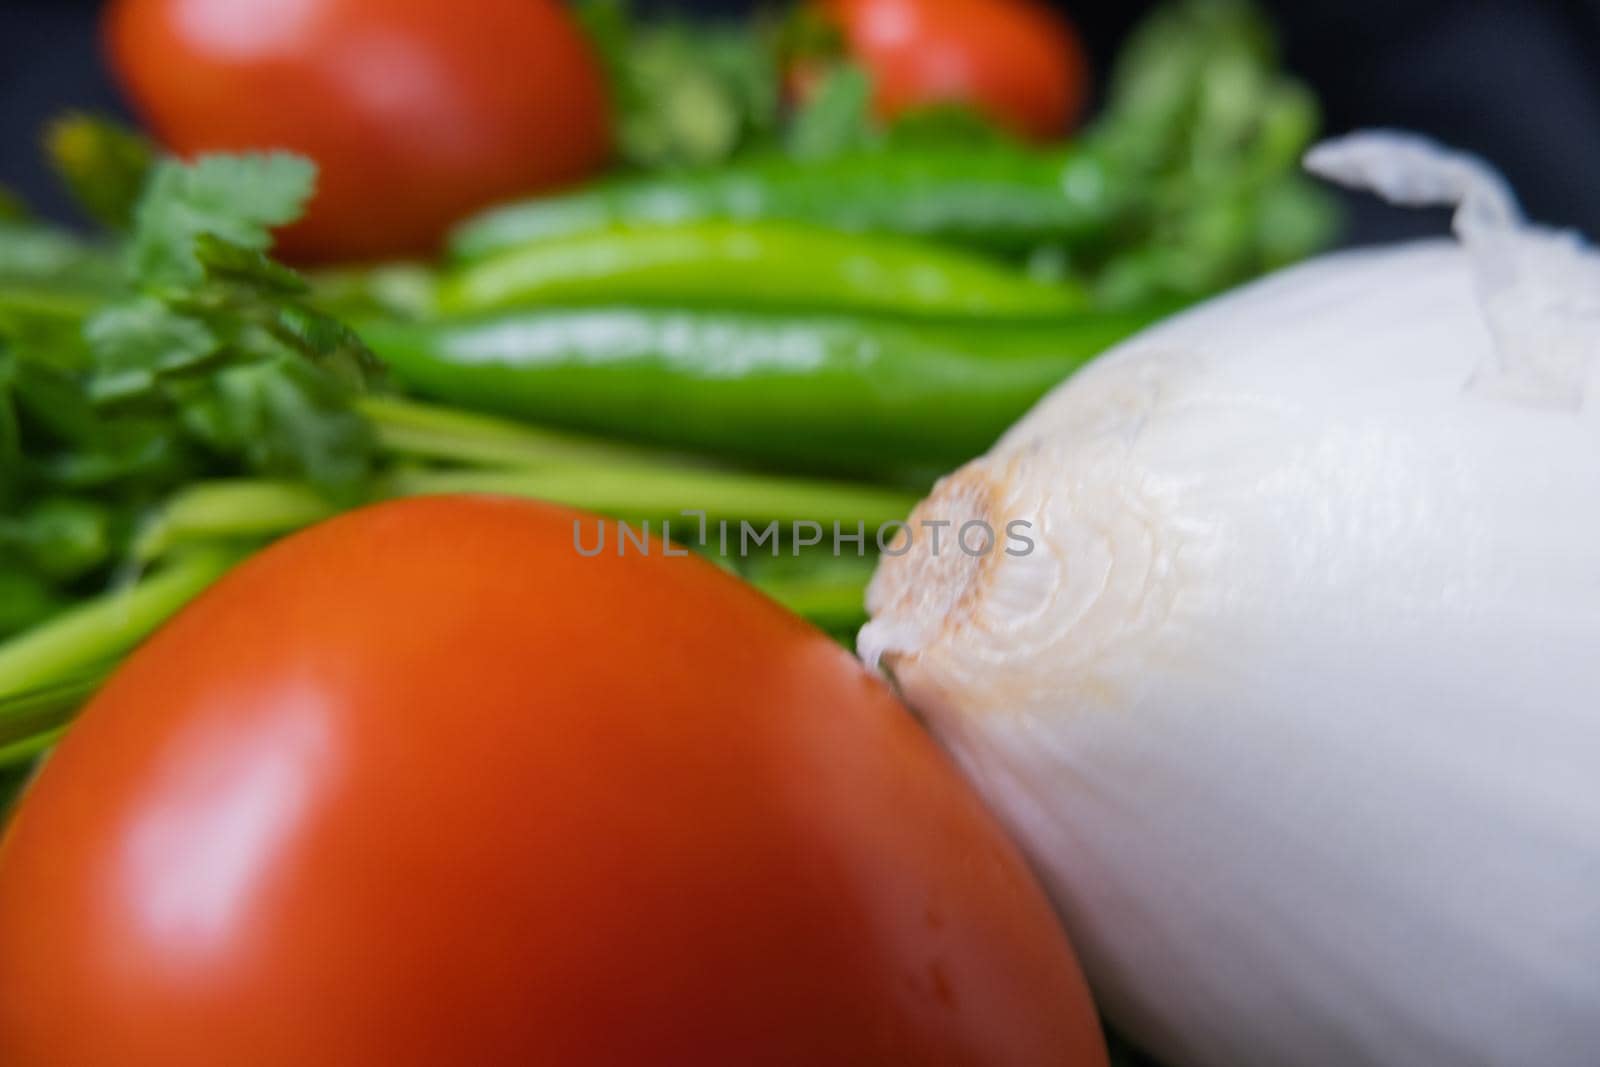 Chili peppers, onion, and a tomato above coriander by Kanelbulle